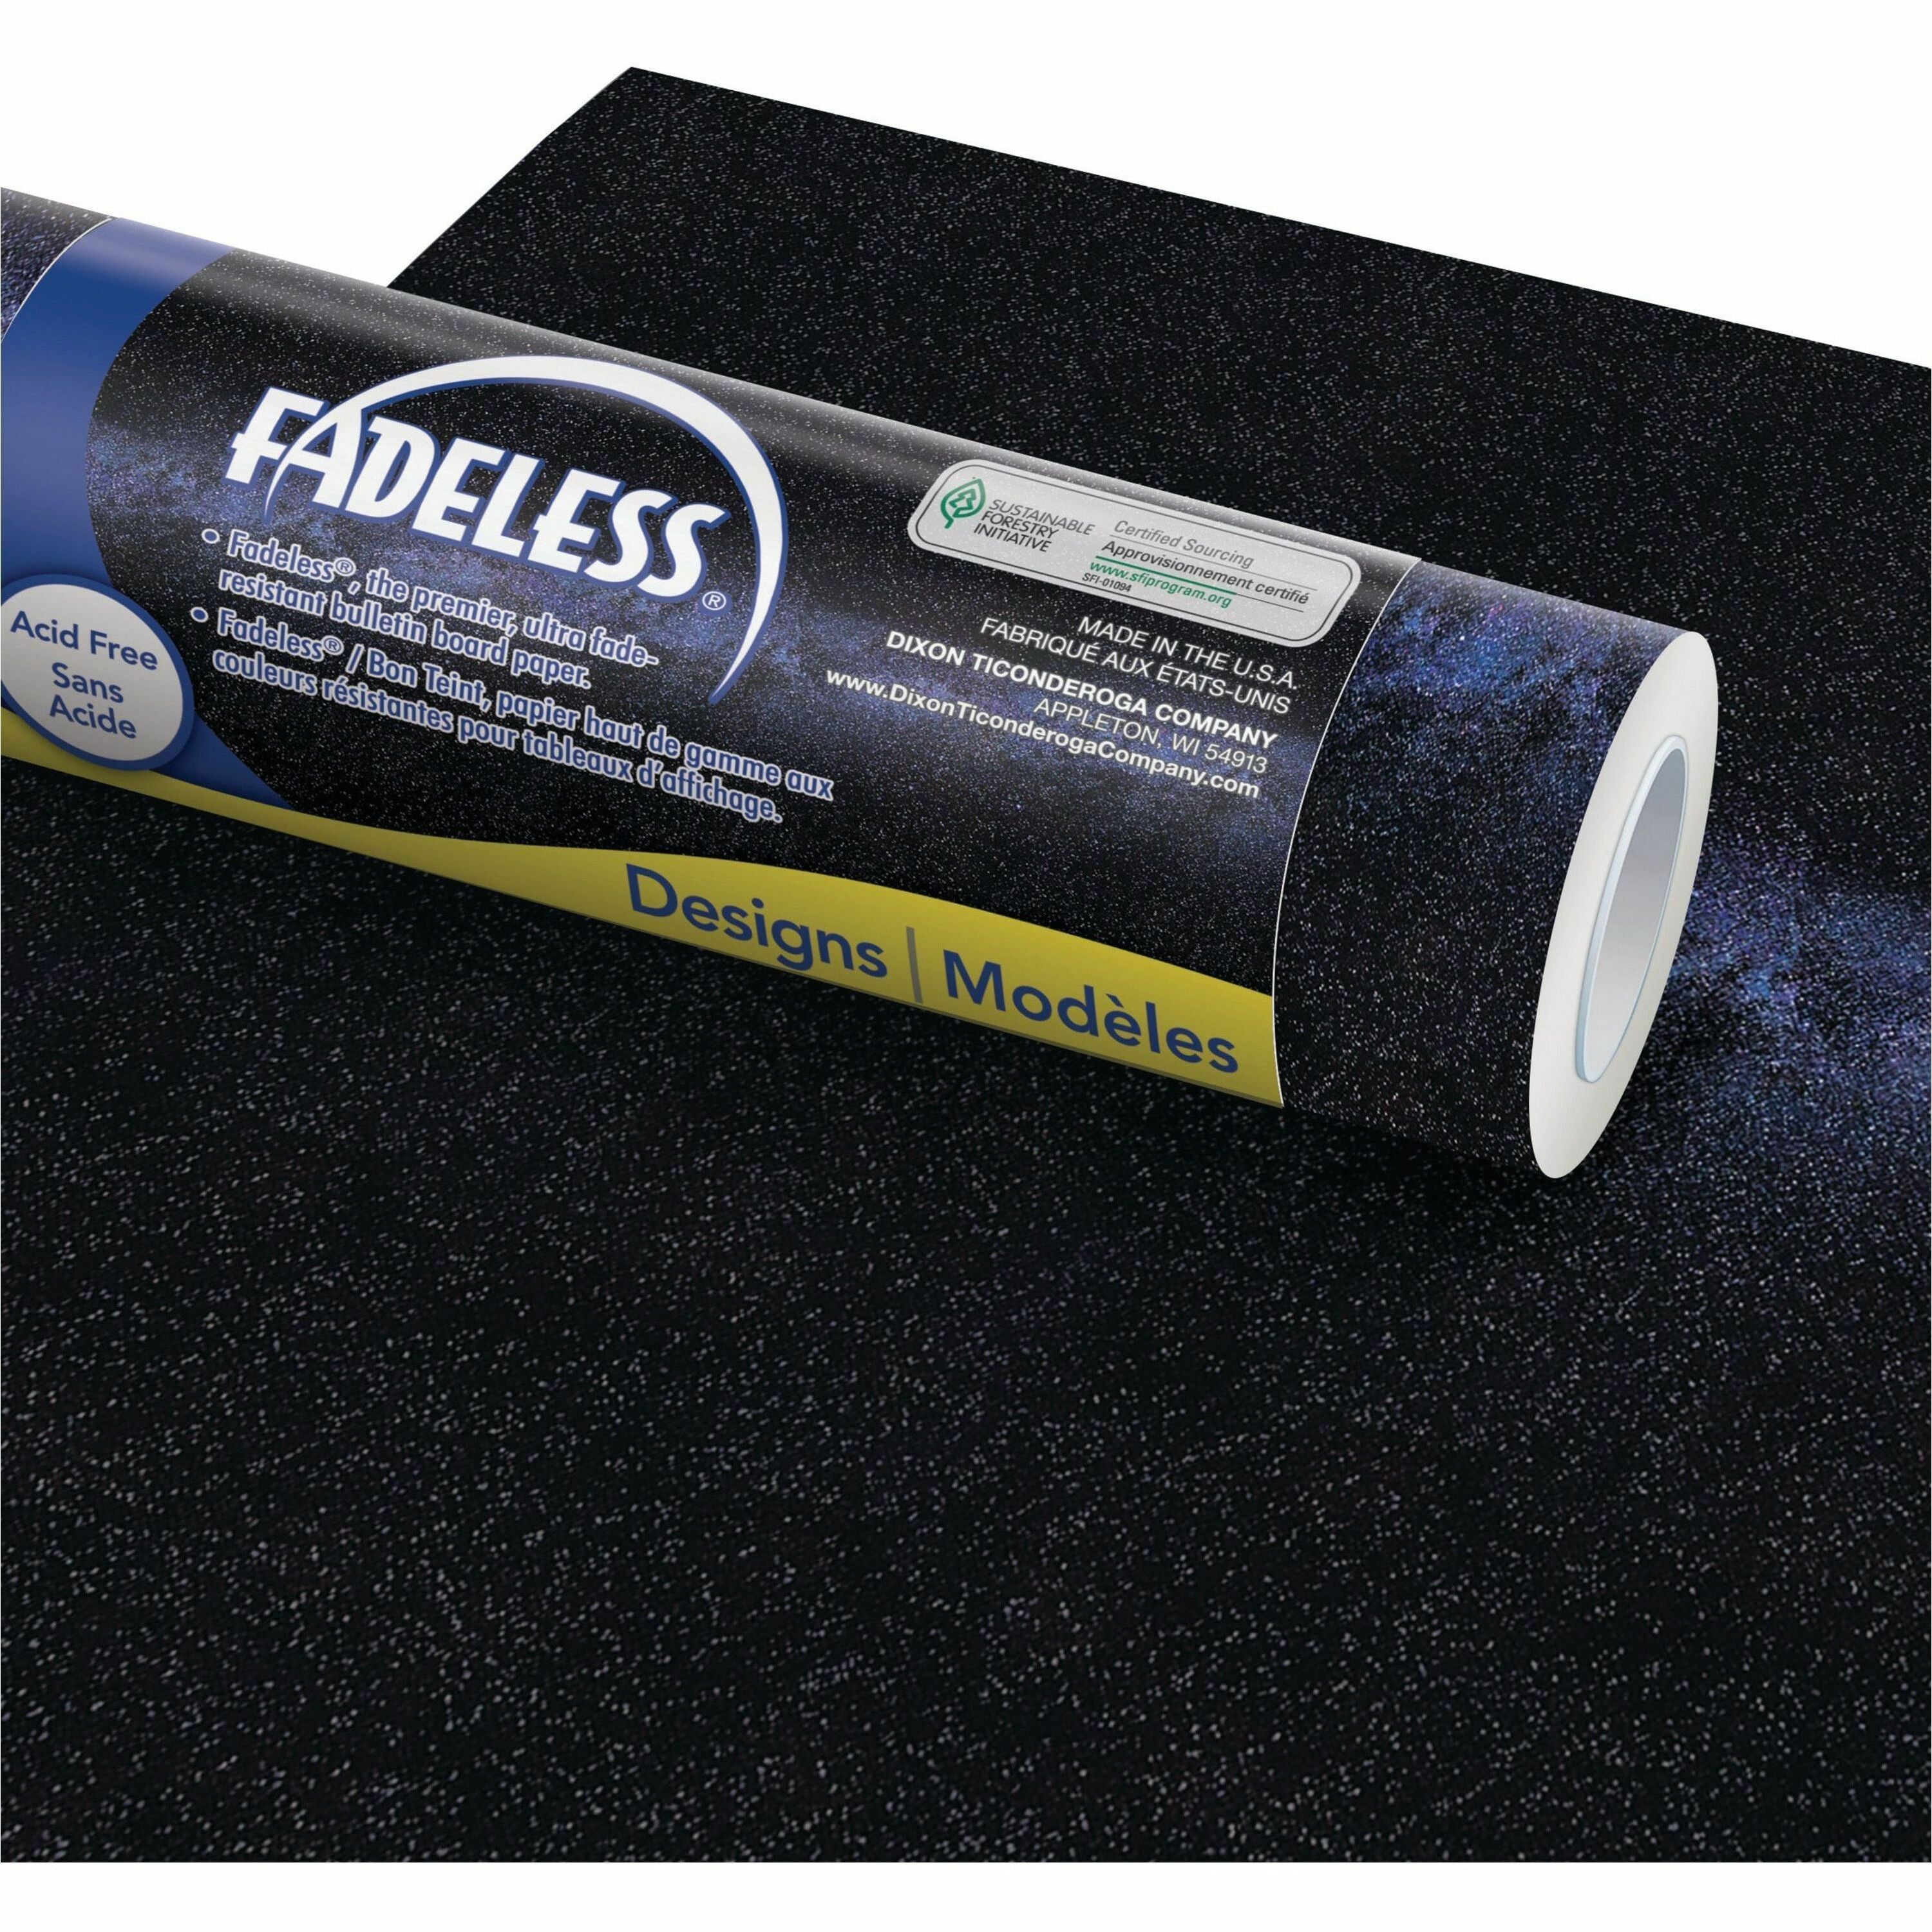 Fadeless Designs Paper Roll - Art Project, Craft Project, Classroom, Bulletin Board, Display, Table Skirting, Party, Decoration - 48"Width x 50"Length - 1 / Roll - Black - 1